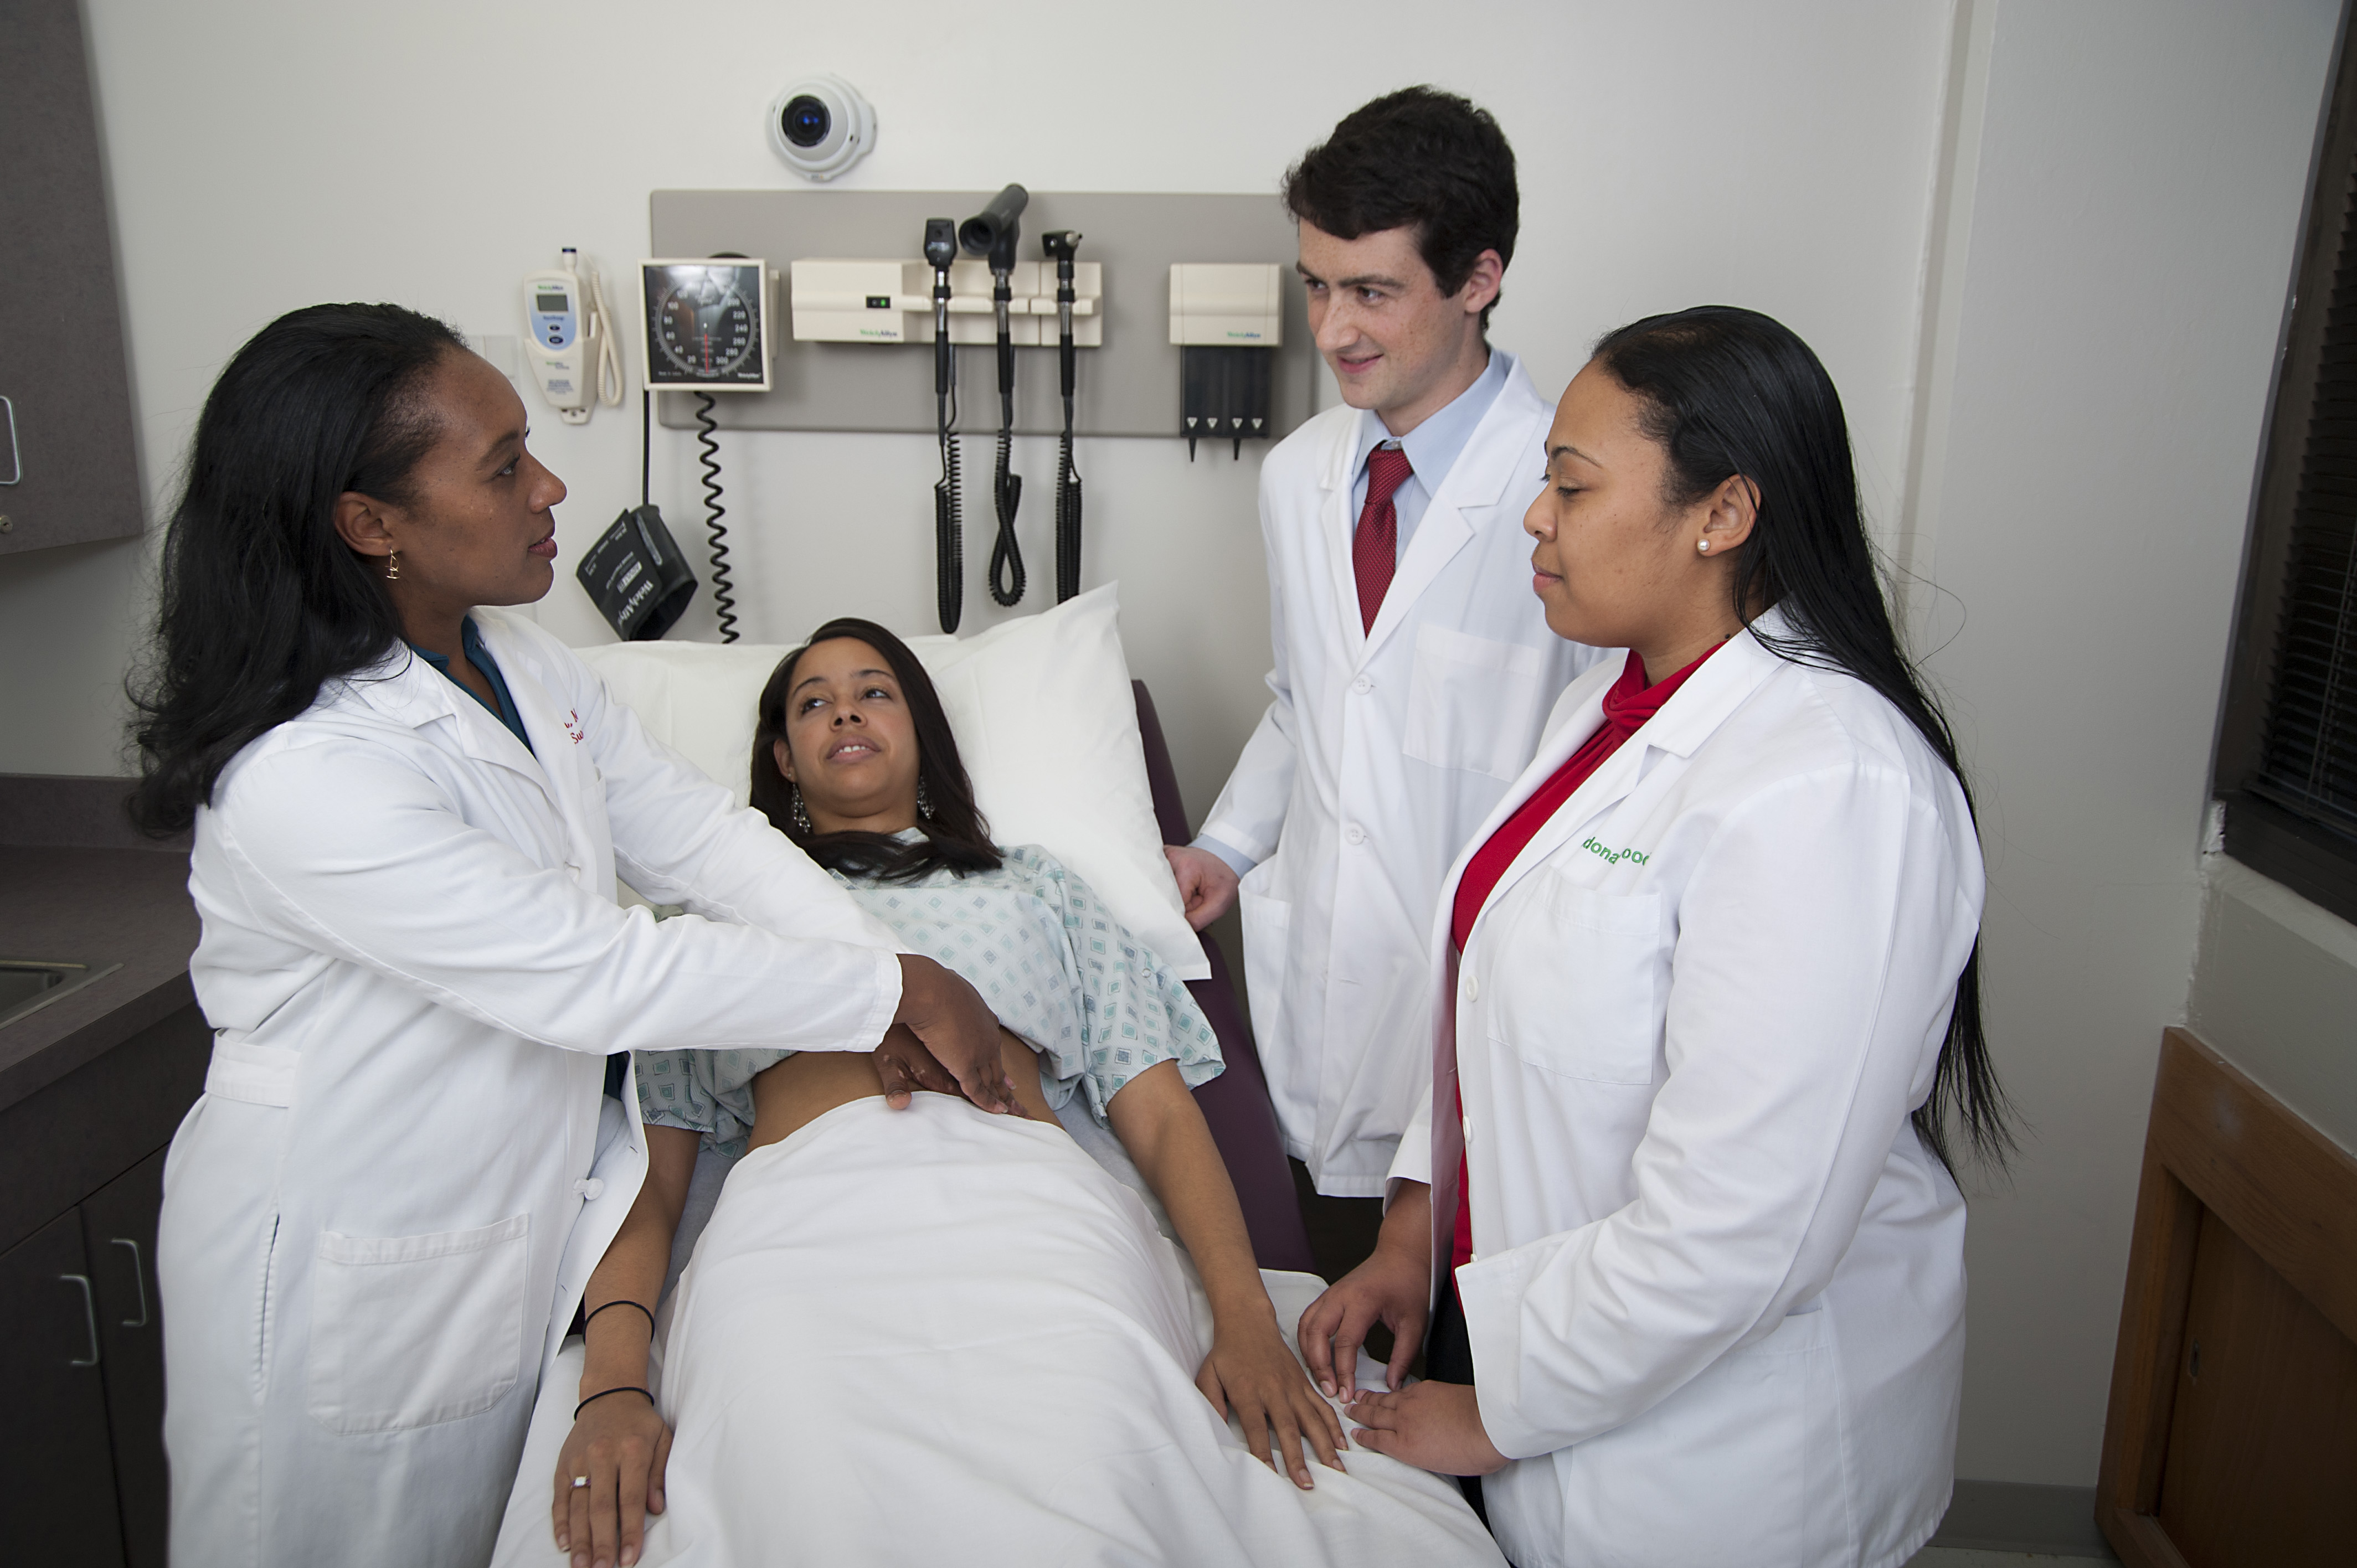 two students observe as a faculty person demonstrates the abdominal exam on a standardized patient
